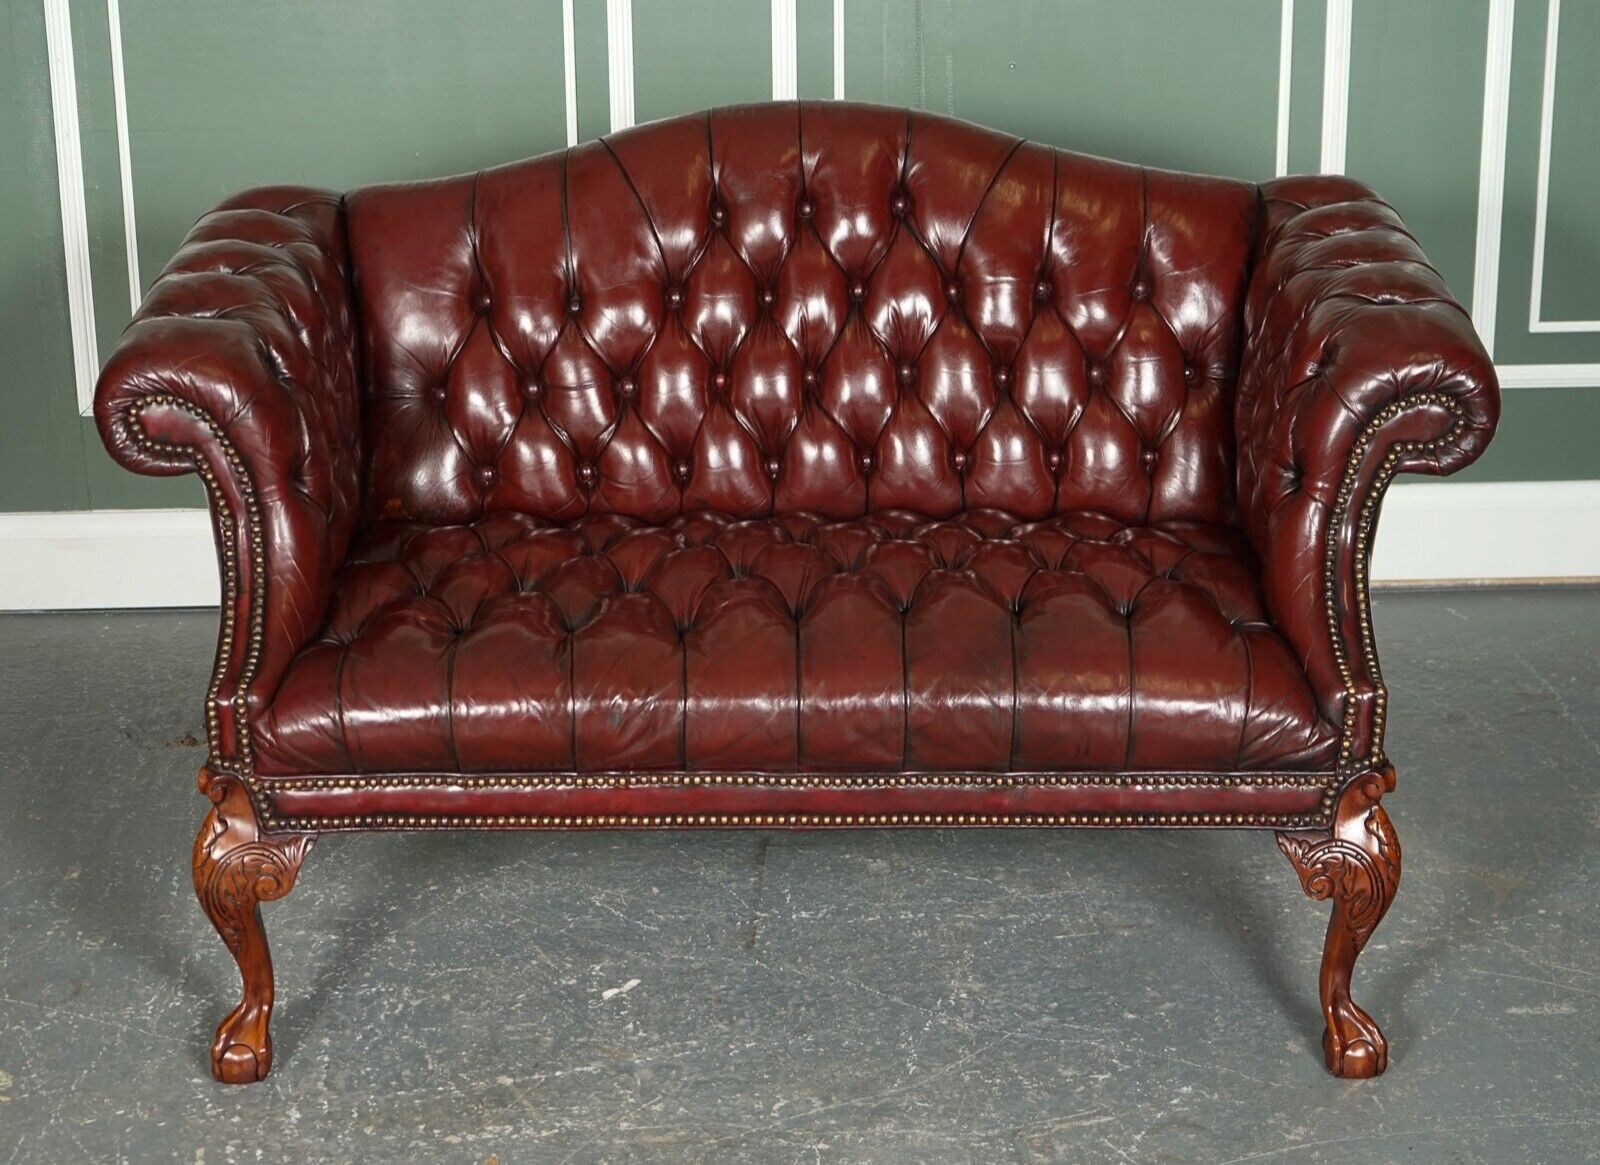 RESTORED HAND DYED BURGUNDY HUMP CAMEL BACK REGENCY CHESTERFIELD BUTTONED SOFA